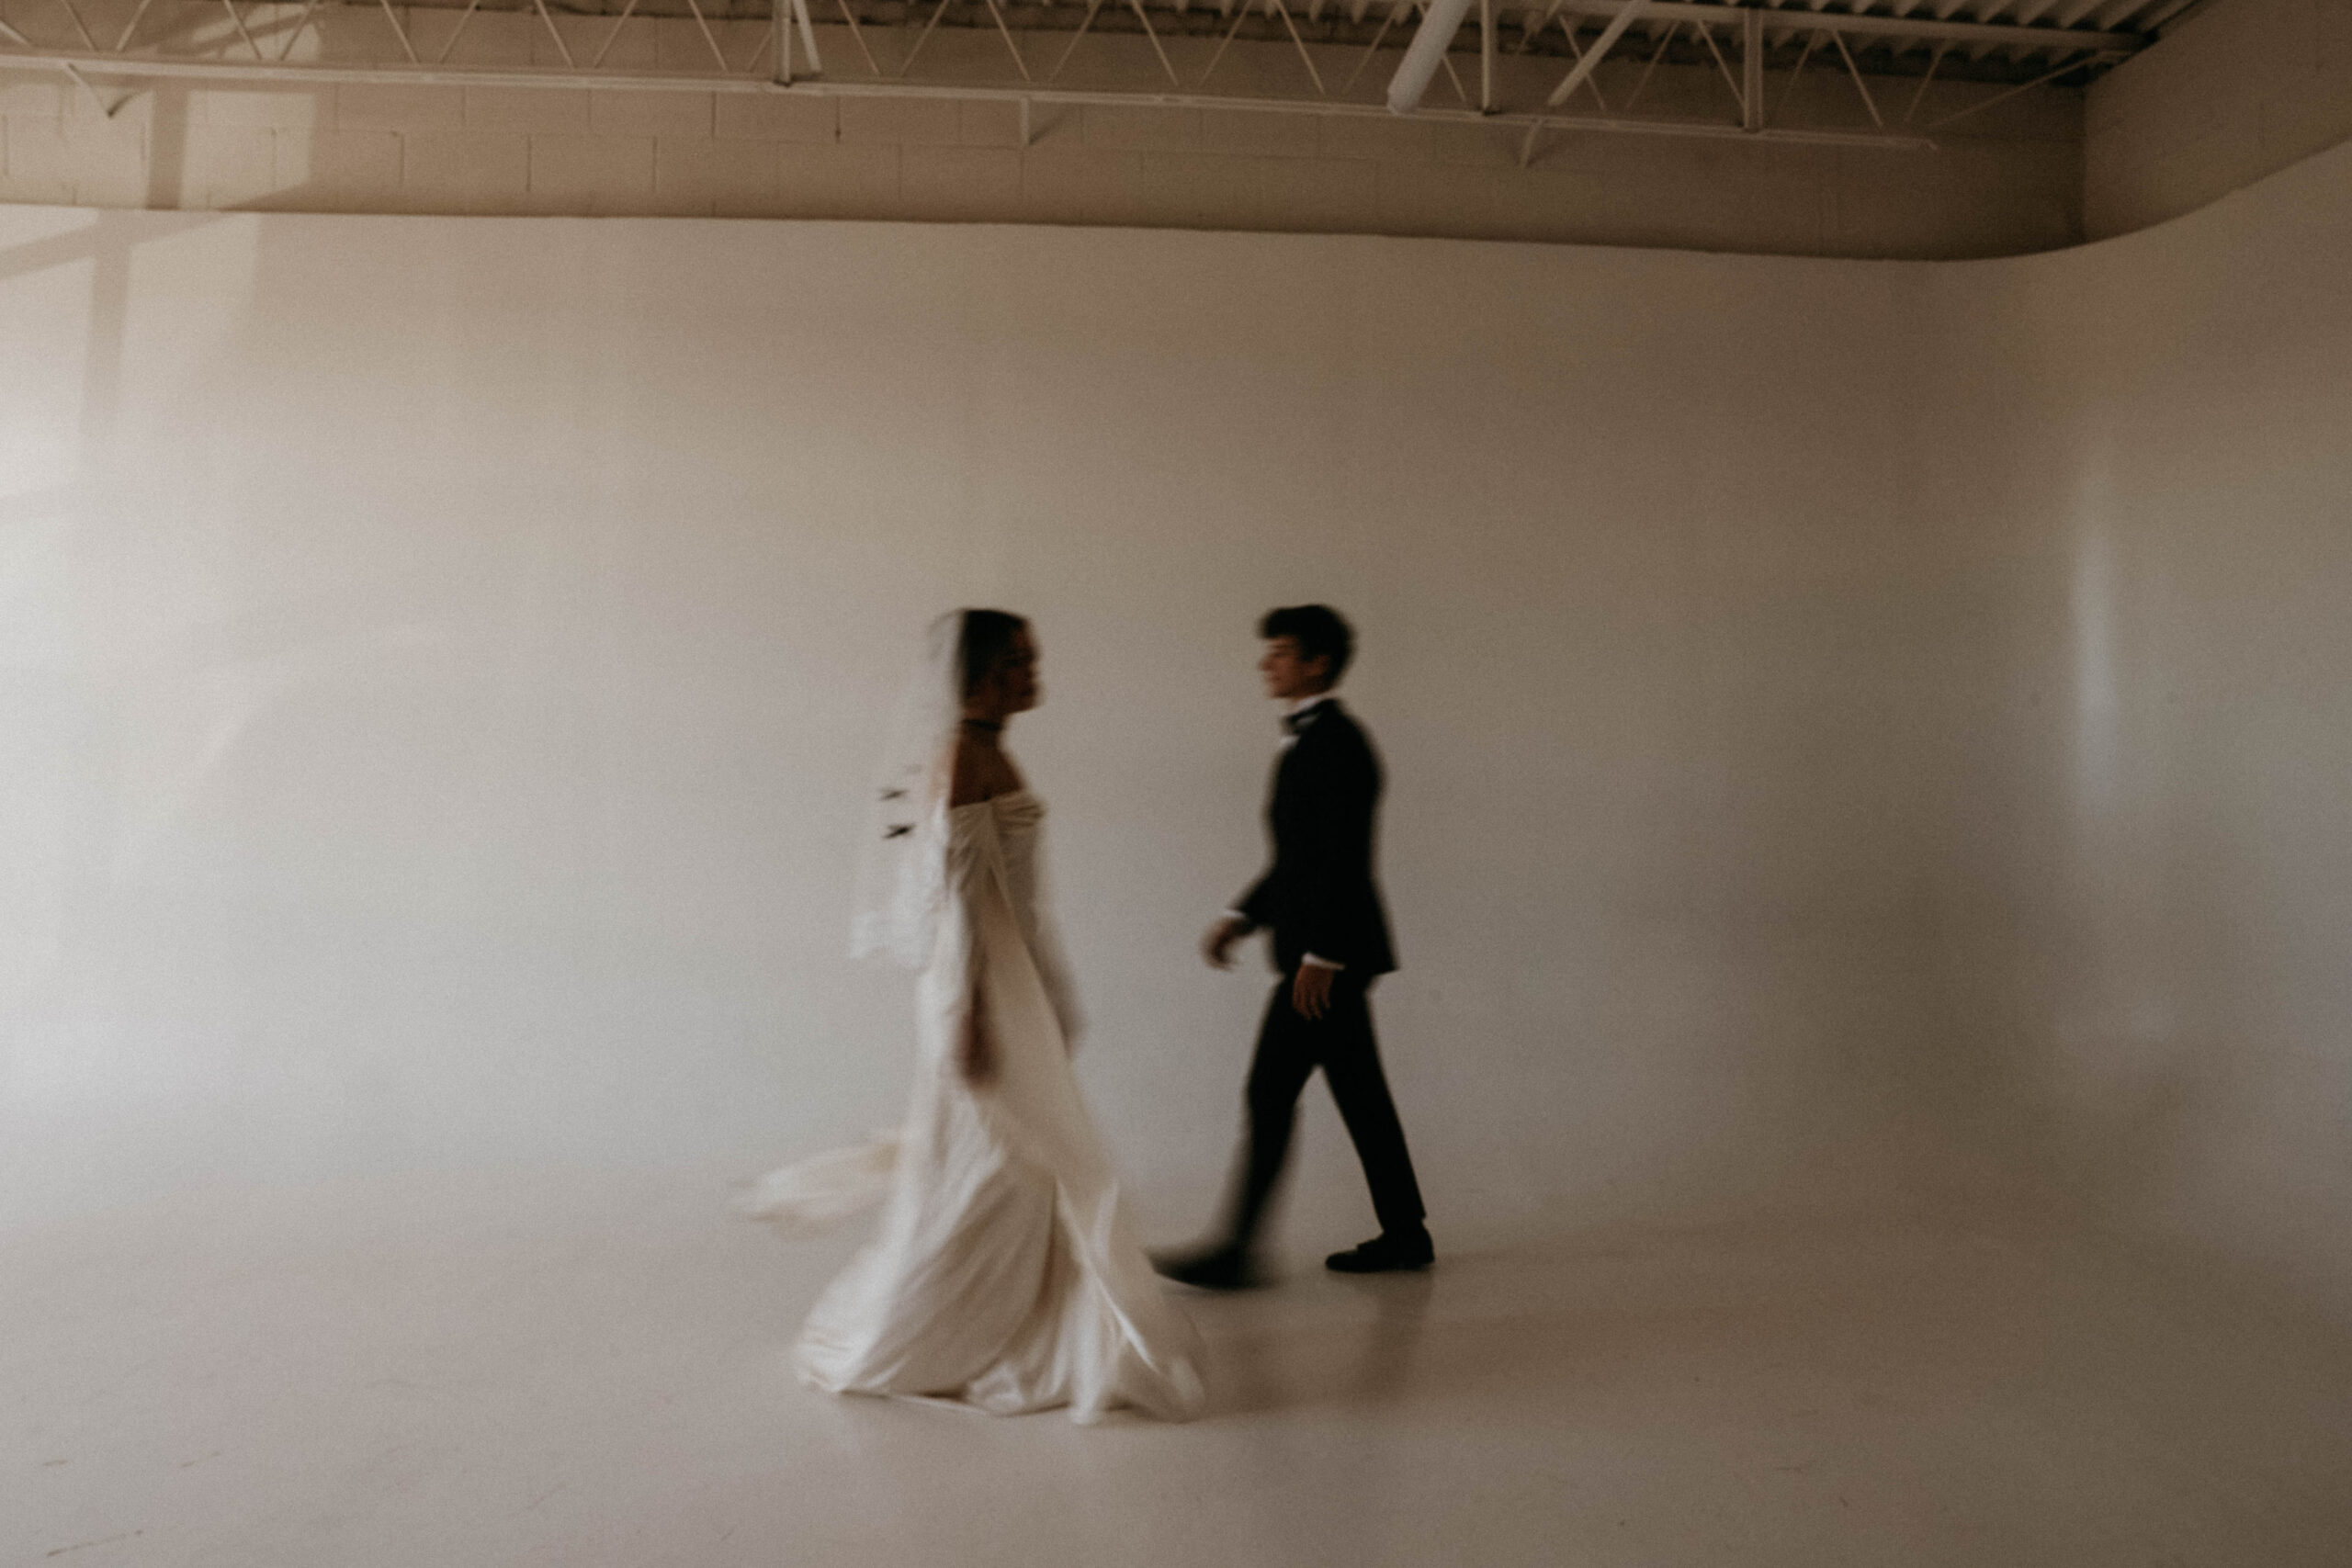 blurry image of bride and groom walking towards each other in studio